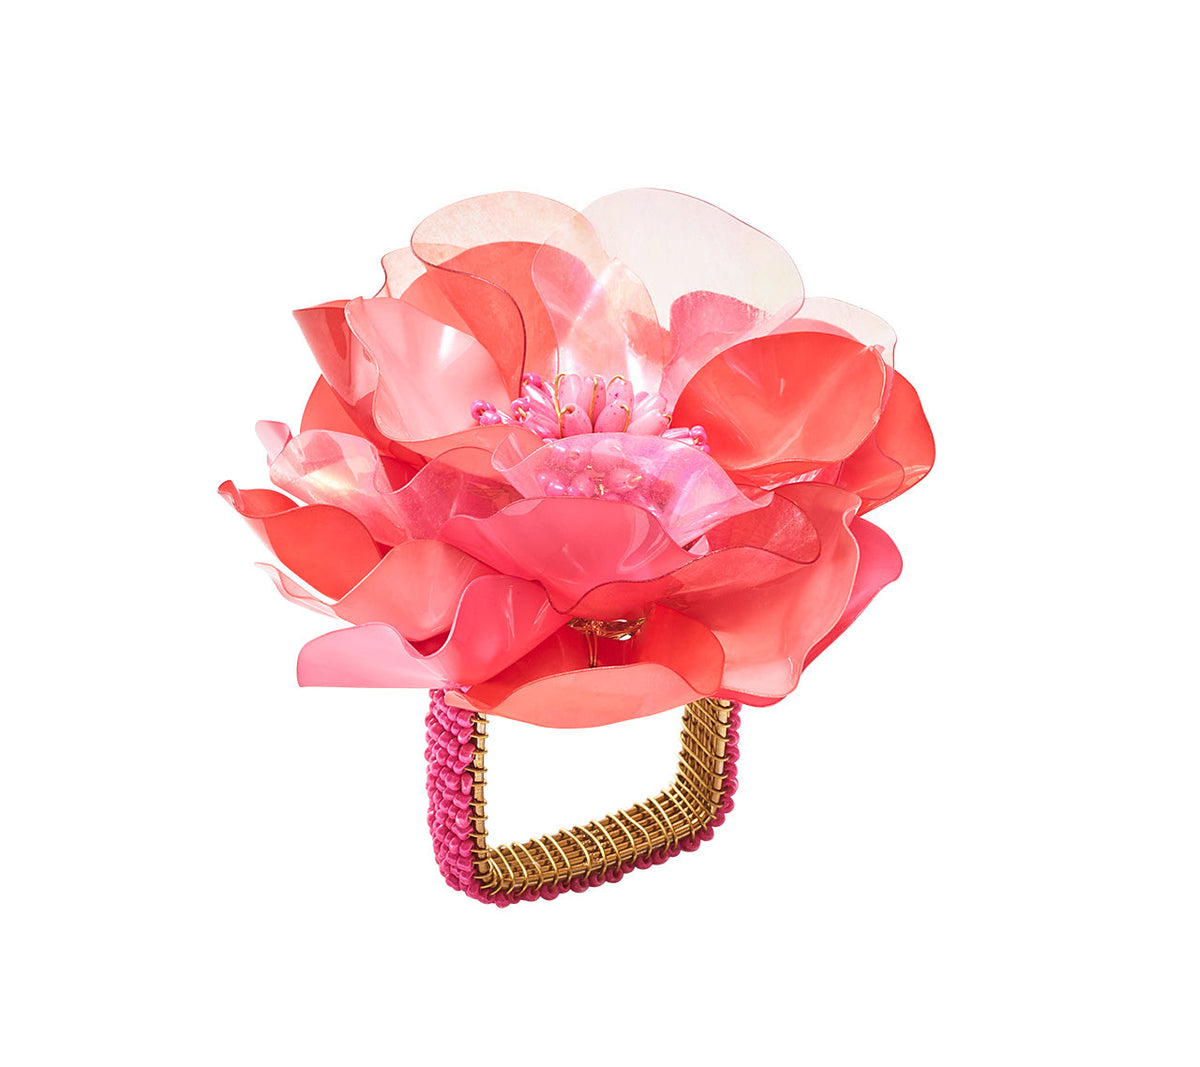 Gardenia Napkin Ring with a salmon-colored blossom sits on a beaded metal base